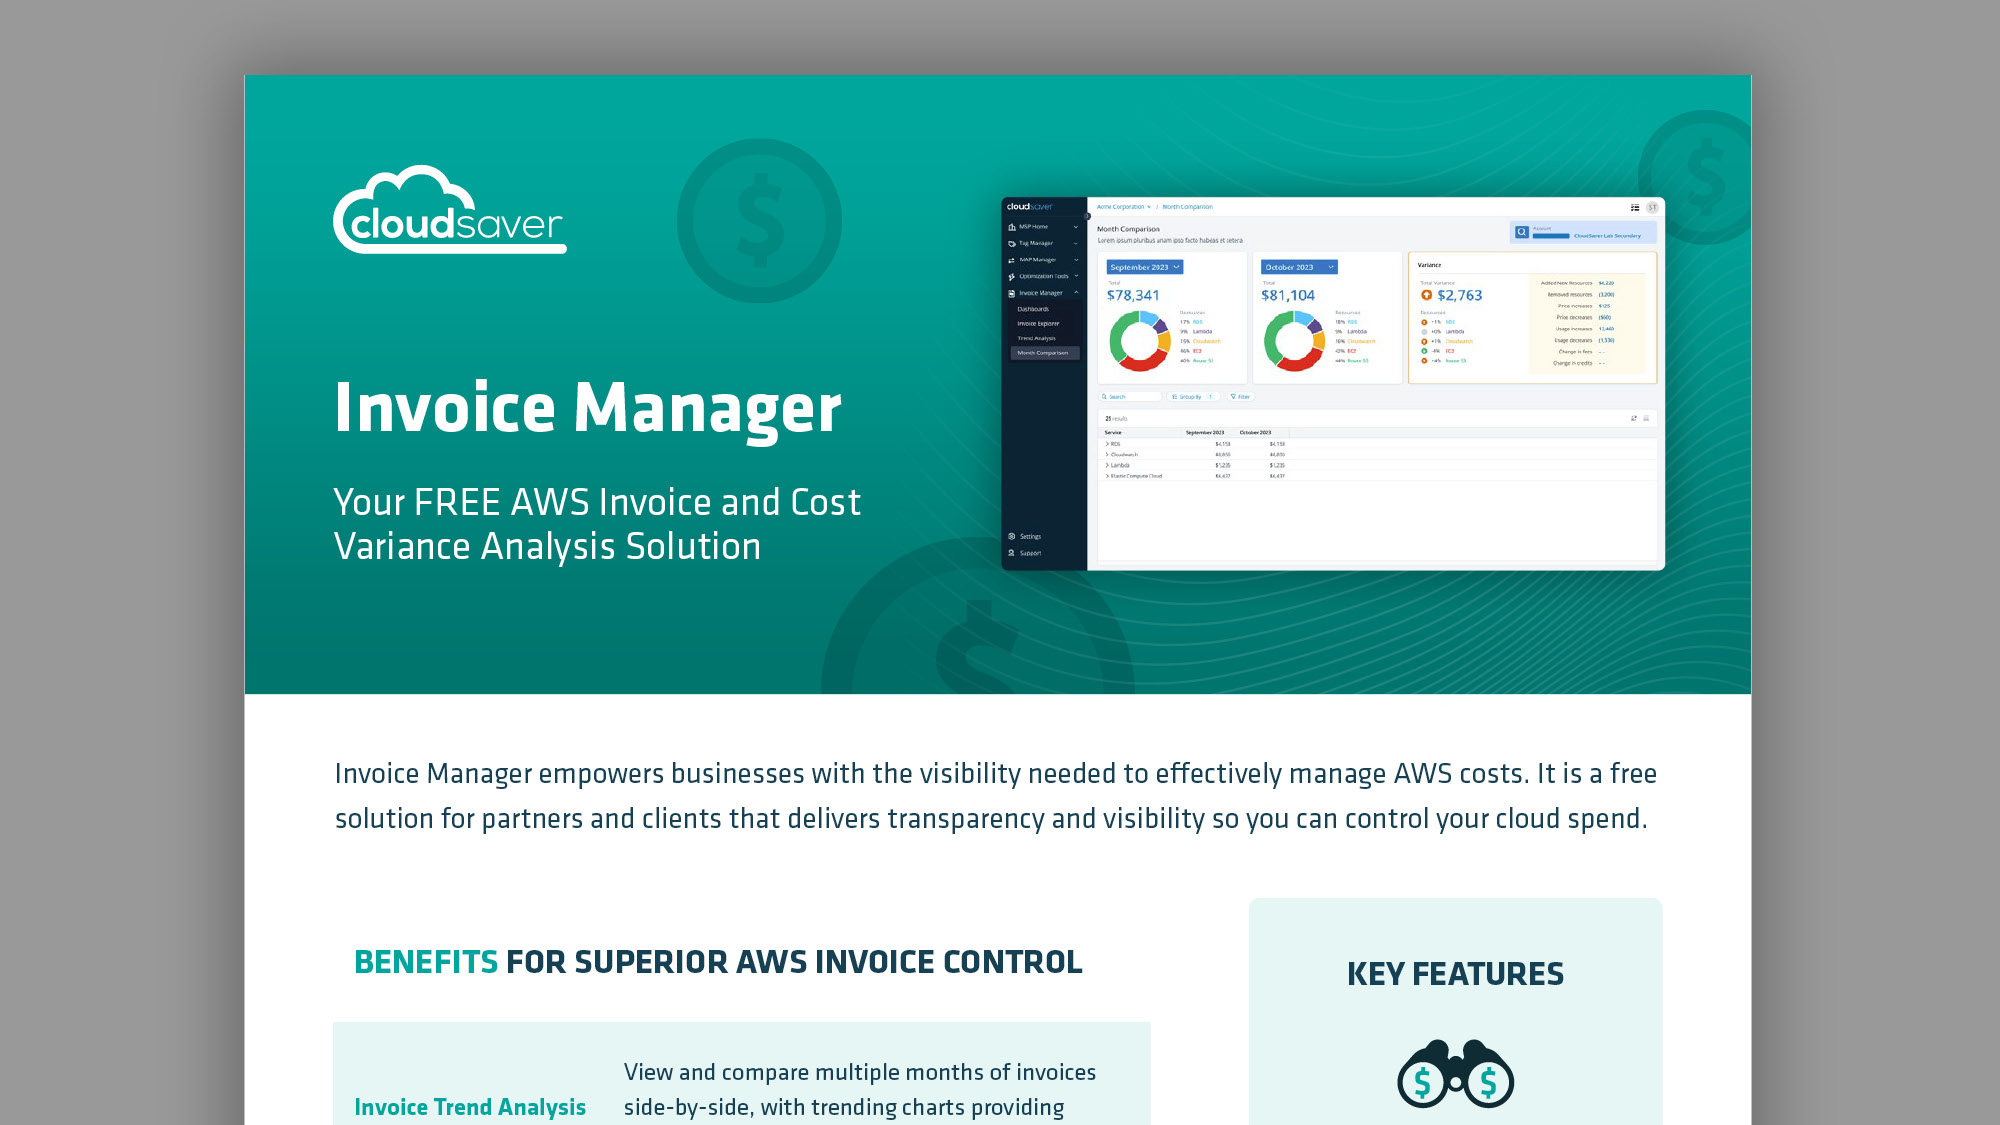 Cloudsaver – Invoice Manager Overview